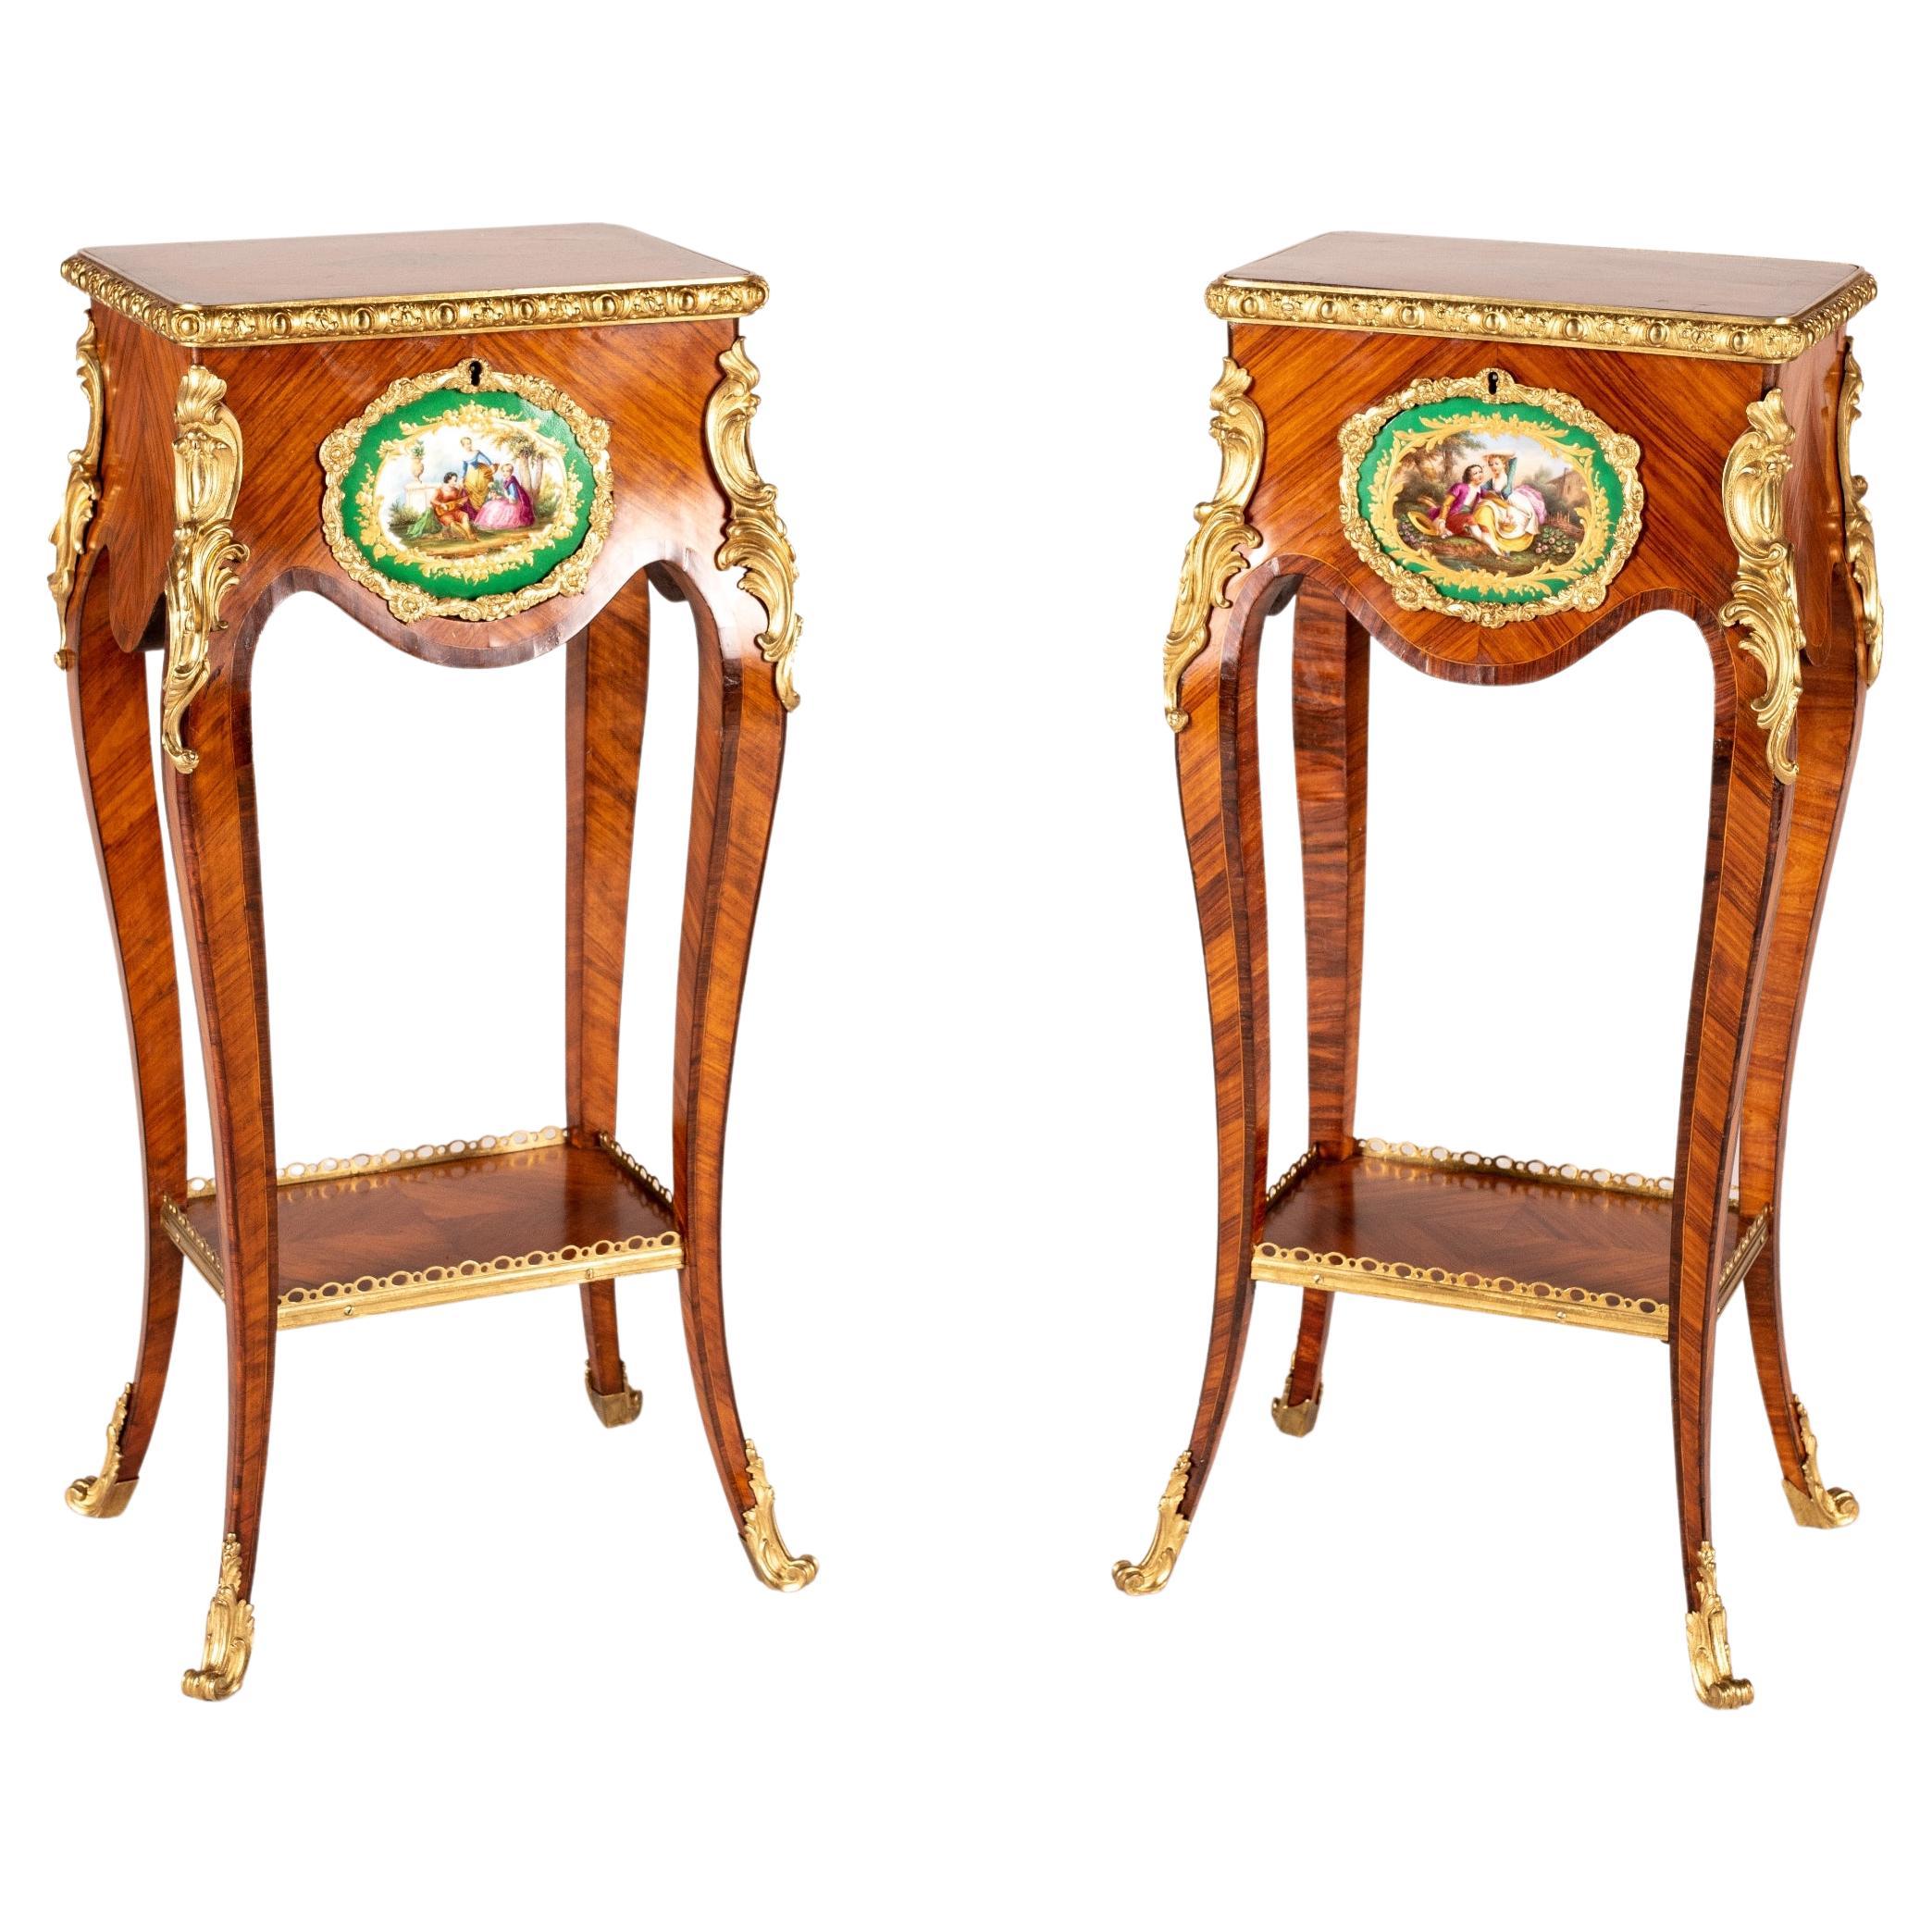 19th Century Pair of Occasional Tables in the Louis XV Transitional Taste